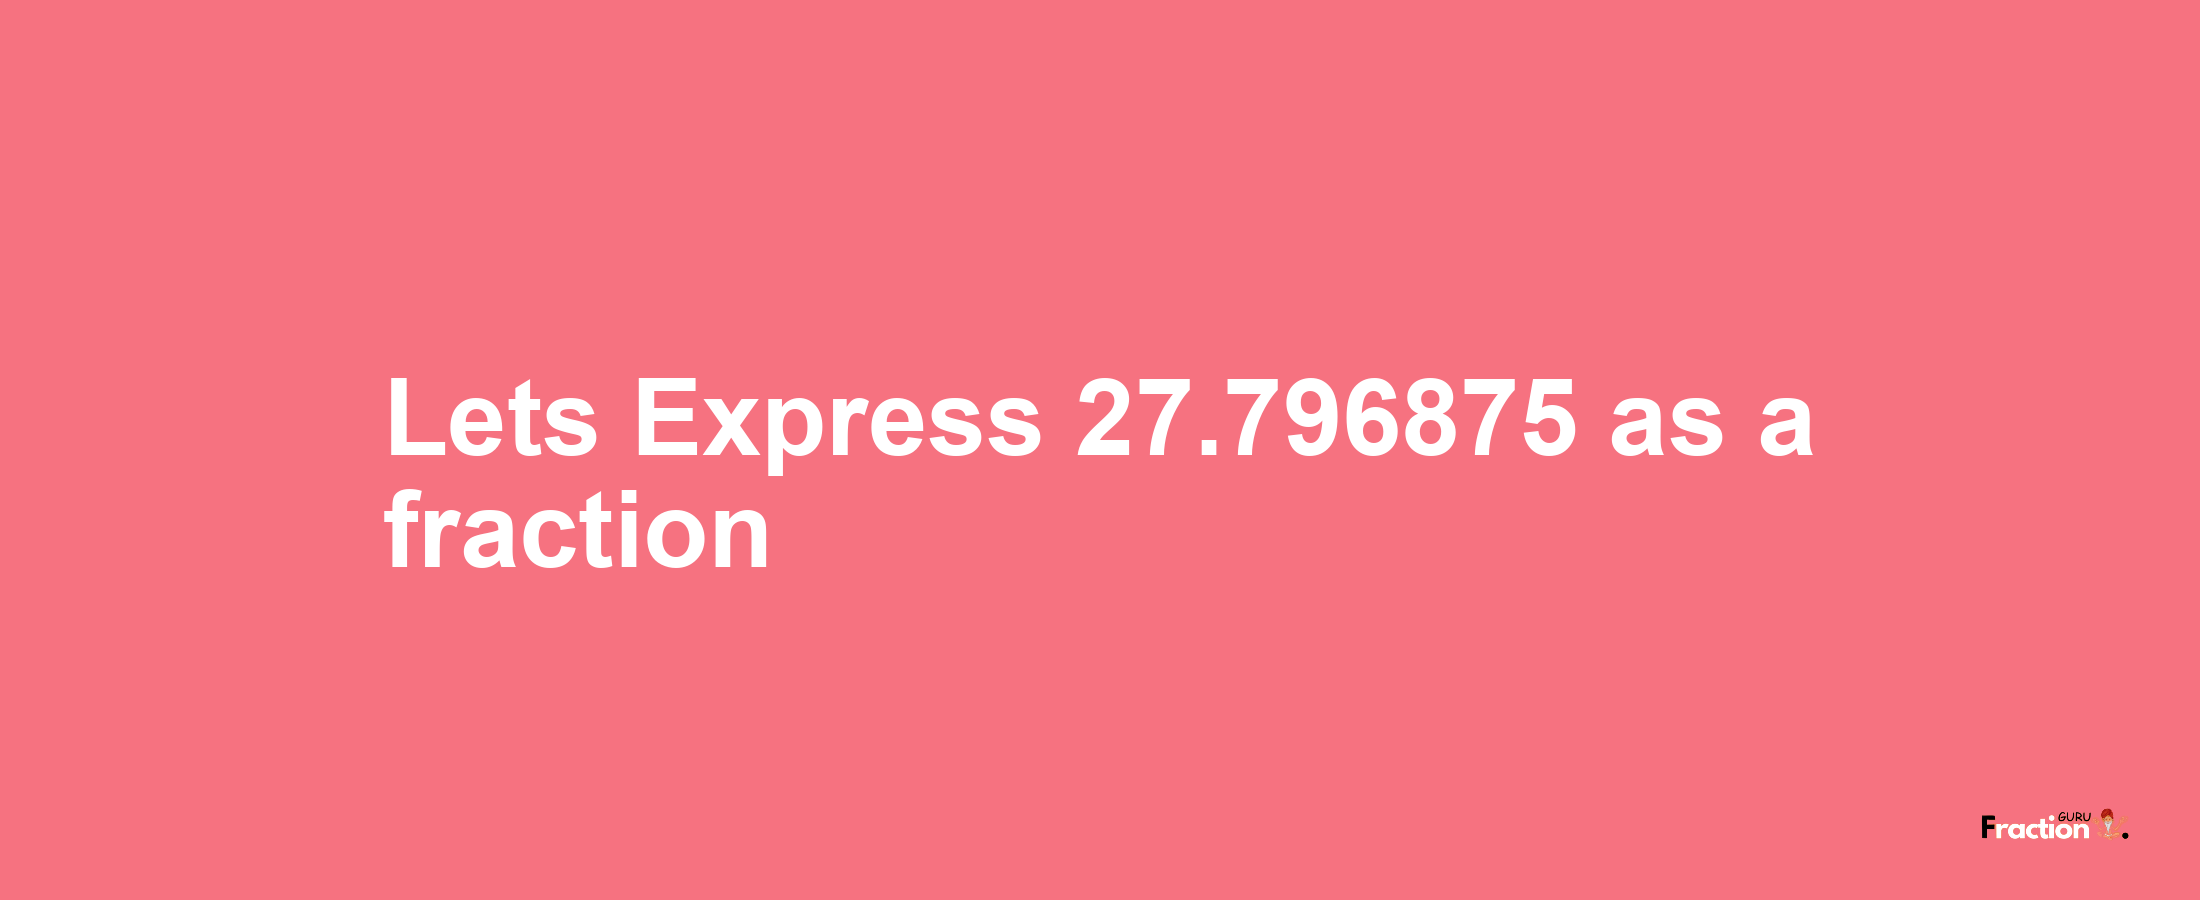 Lets Express 27.796875 as afraction